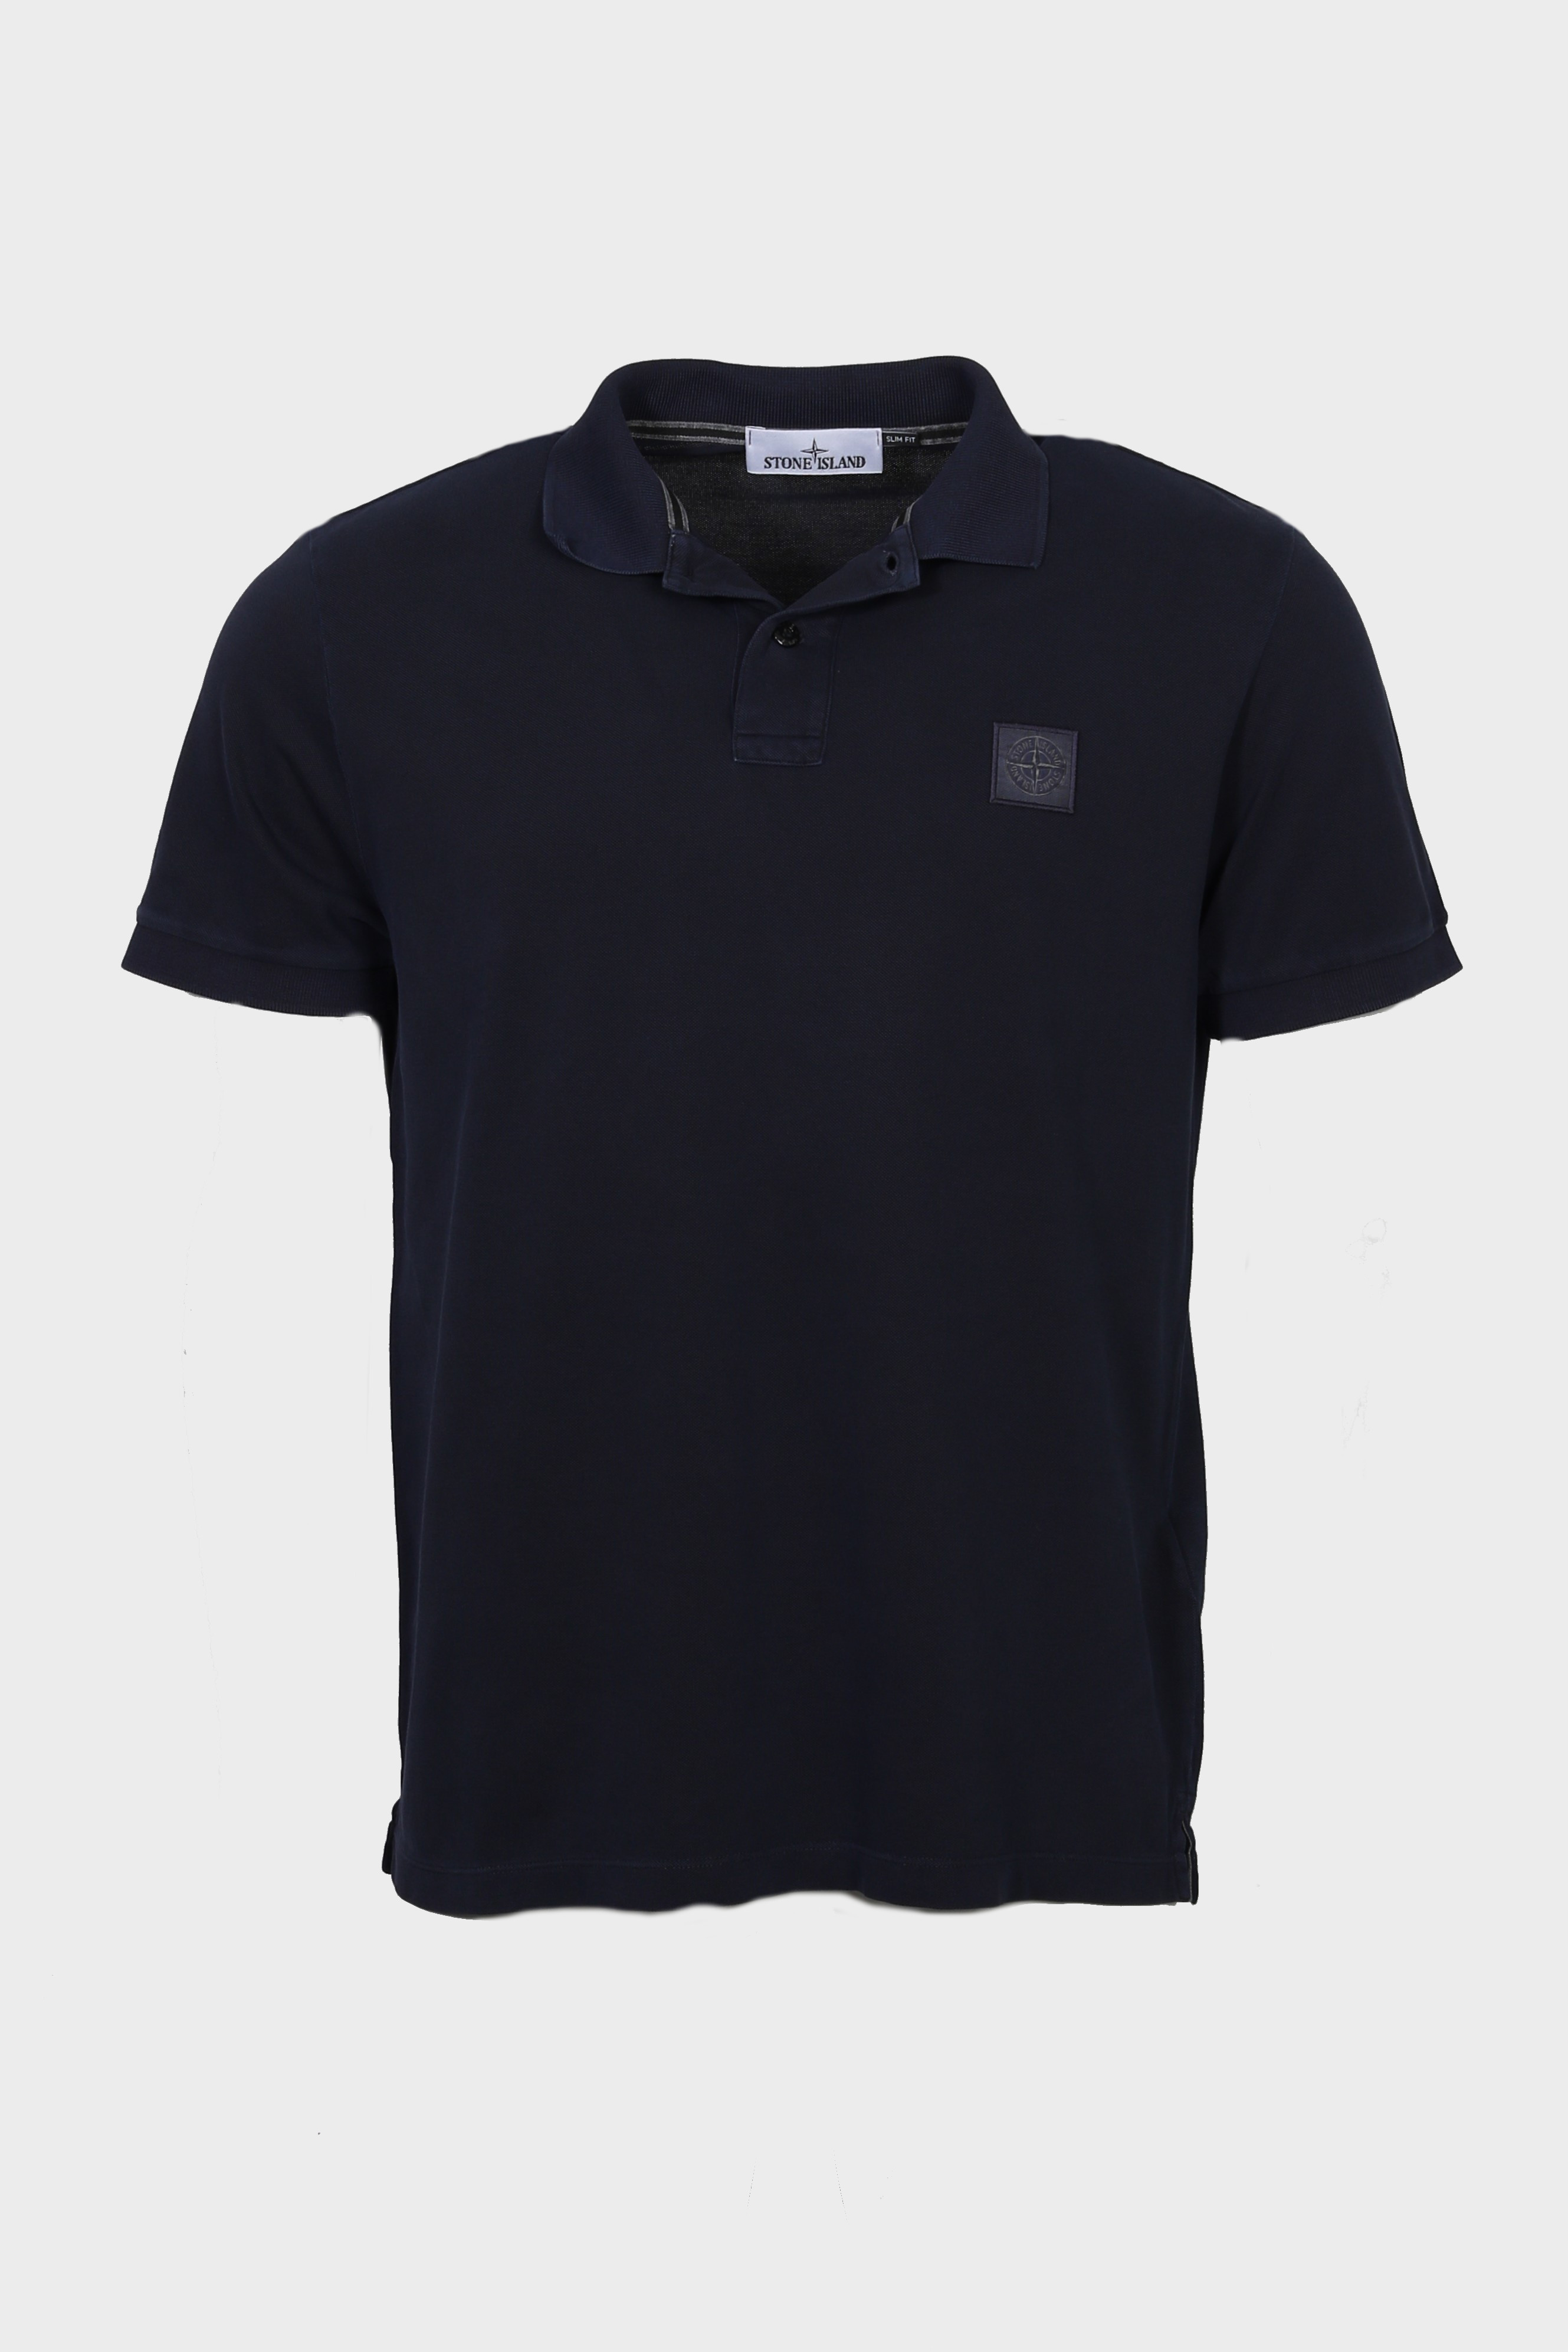 STONE ISLAND Polo Shirt in Navy M